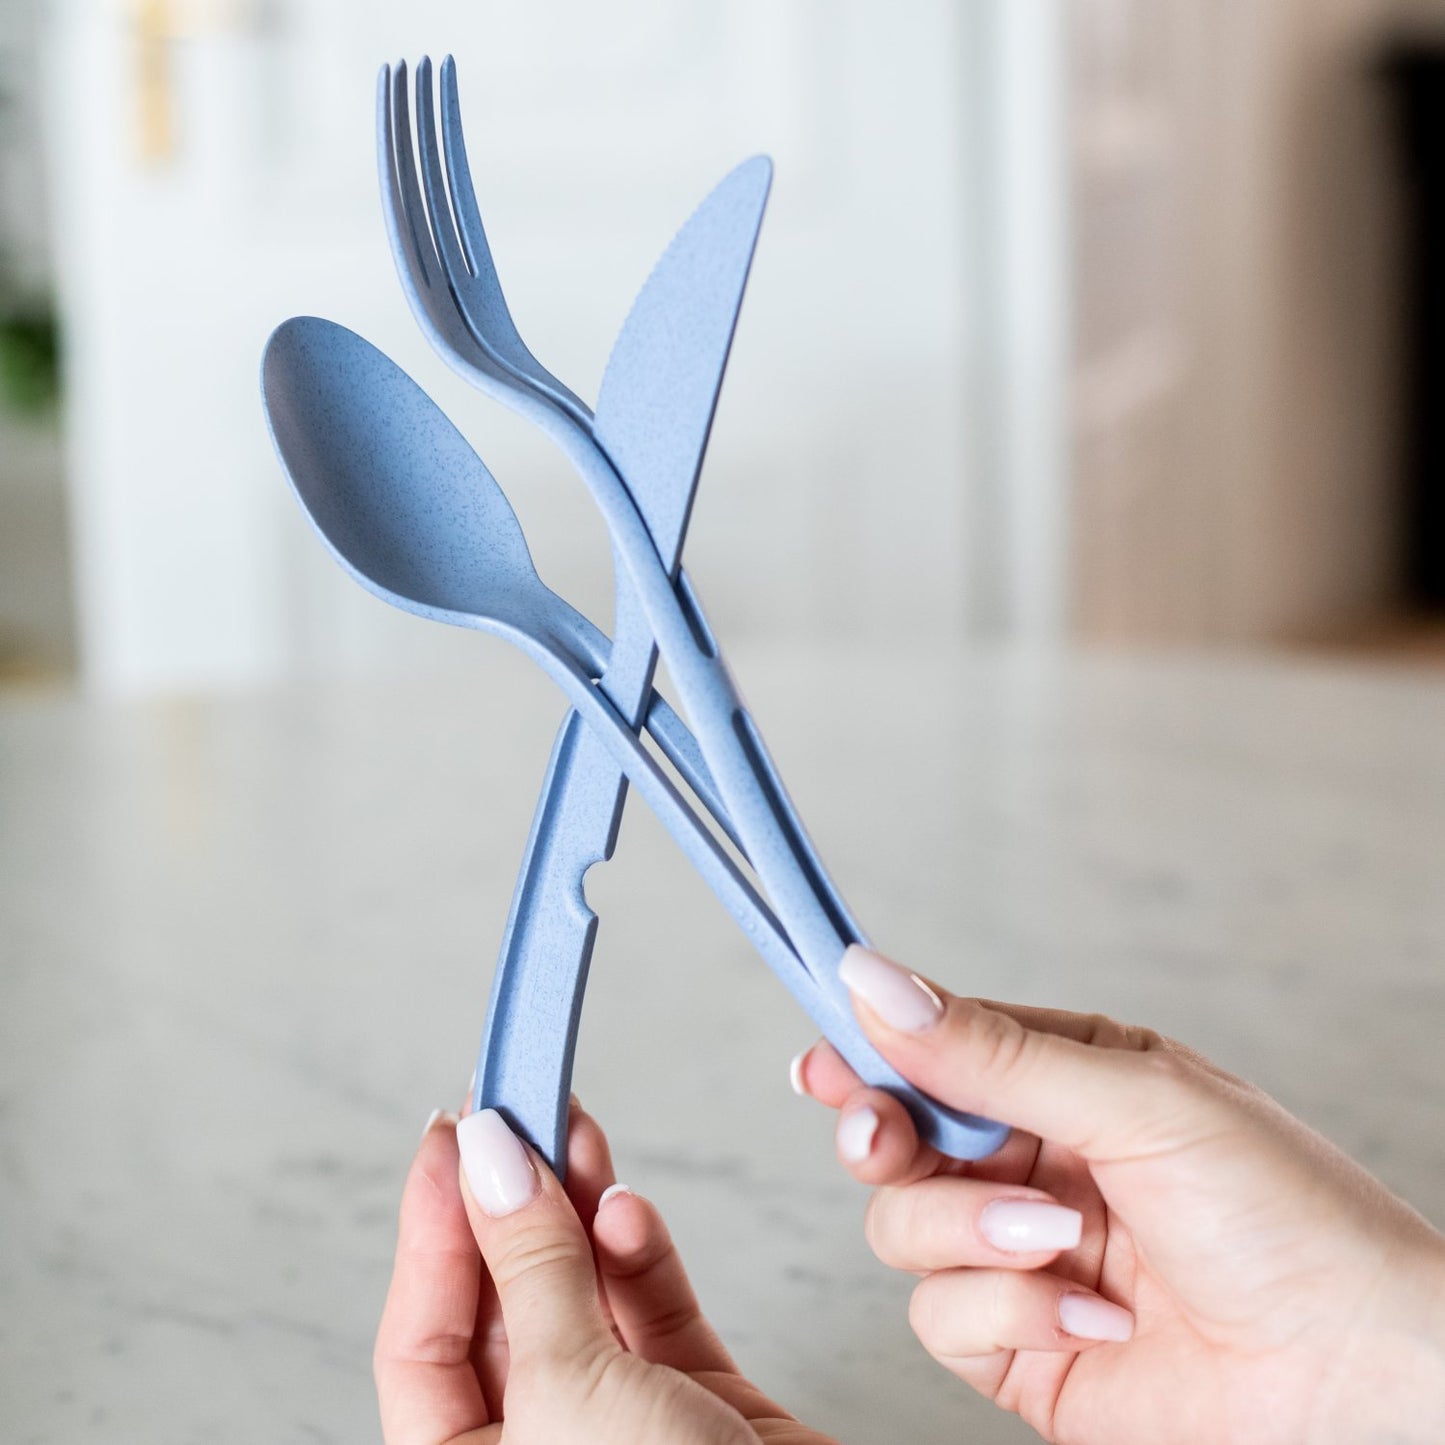 Koziol Sustainable To-go Cutlery Sets